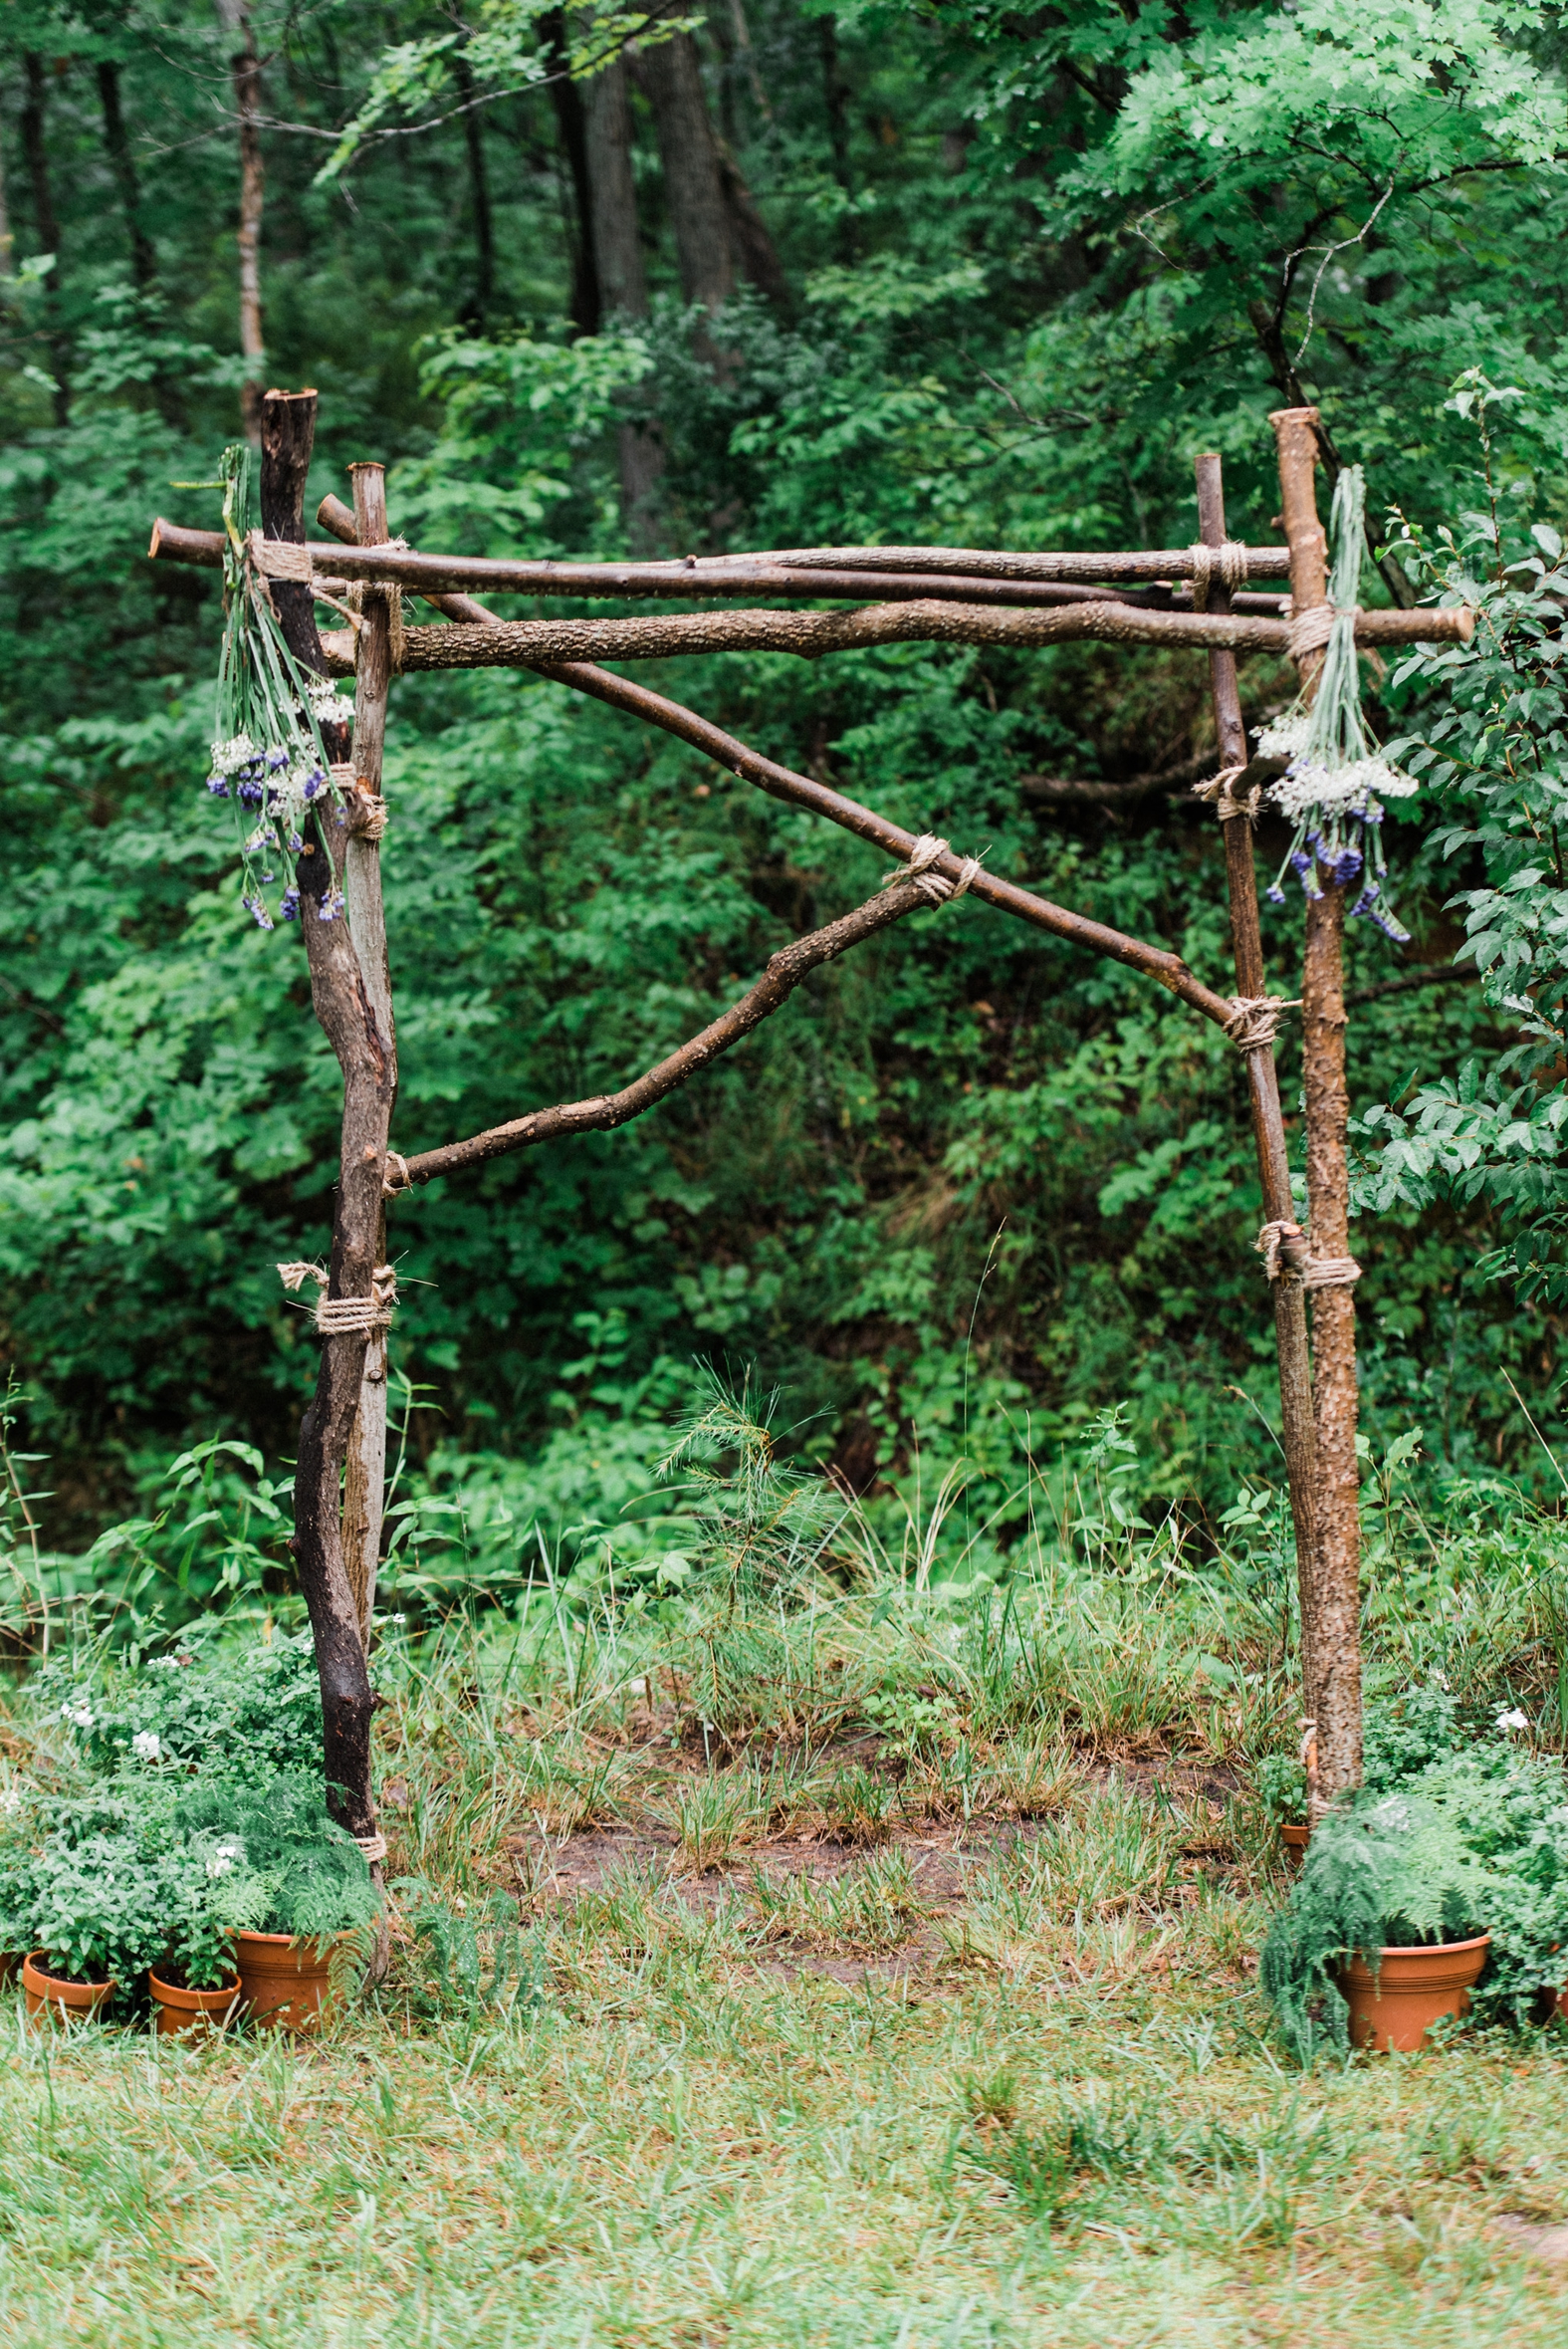 Wedding archway trellis for ceremony made of branches with purple flowers and greenery; outdoor wedding ceremony.